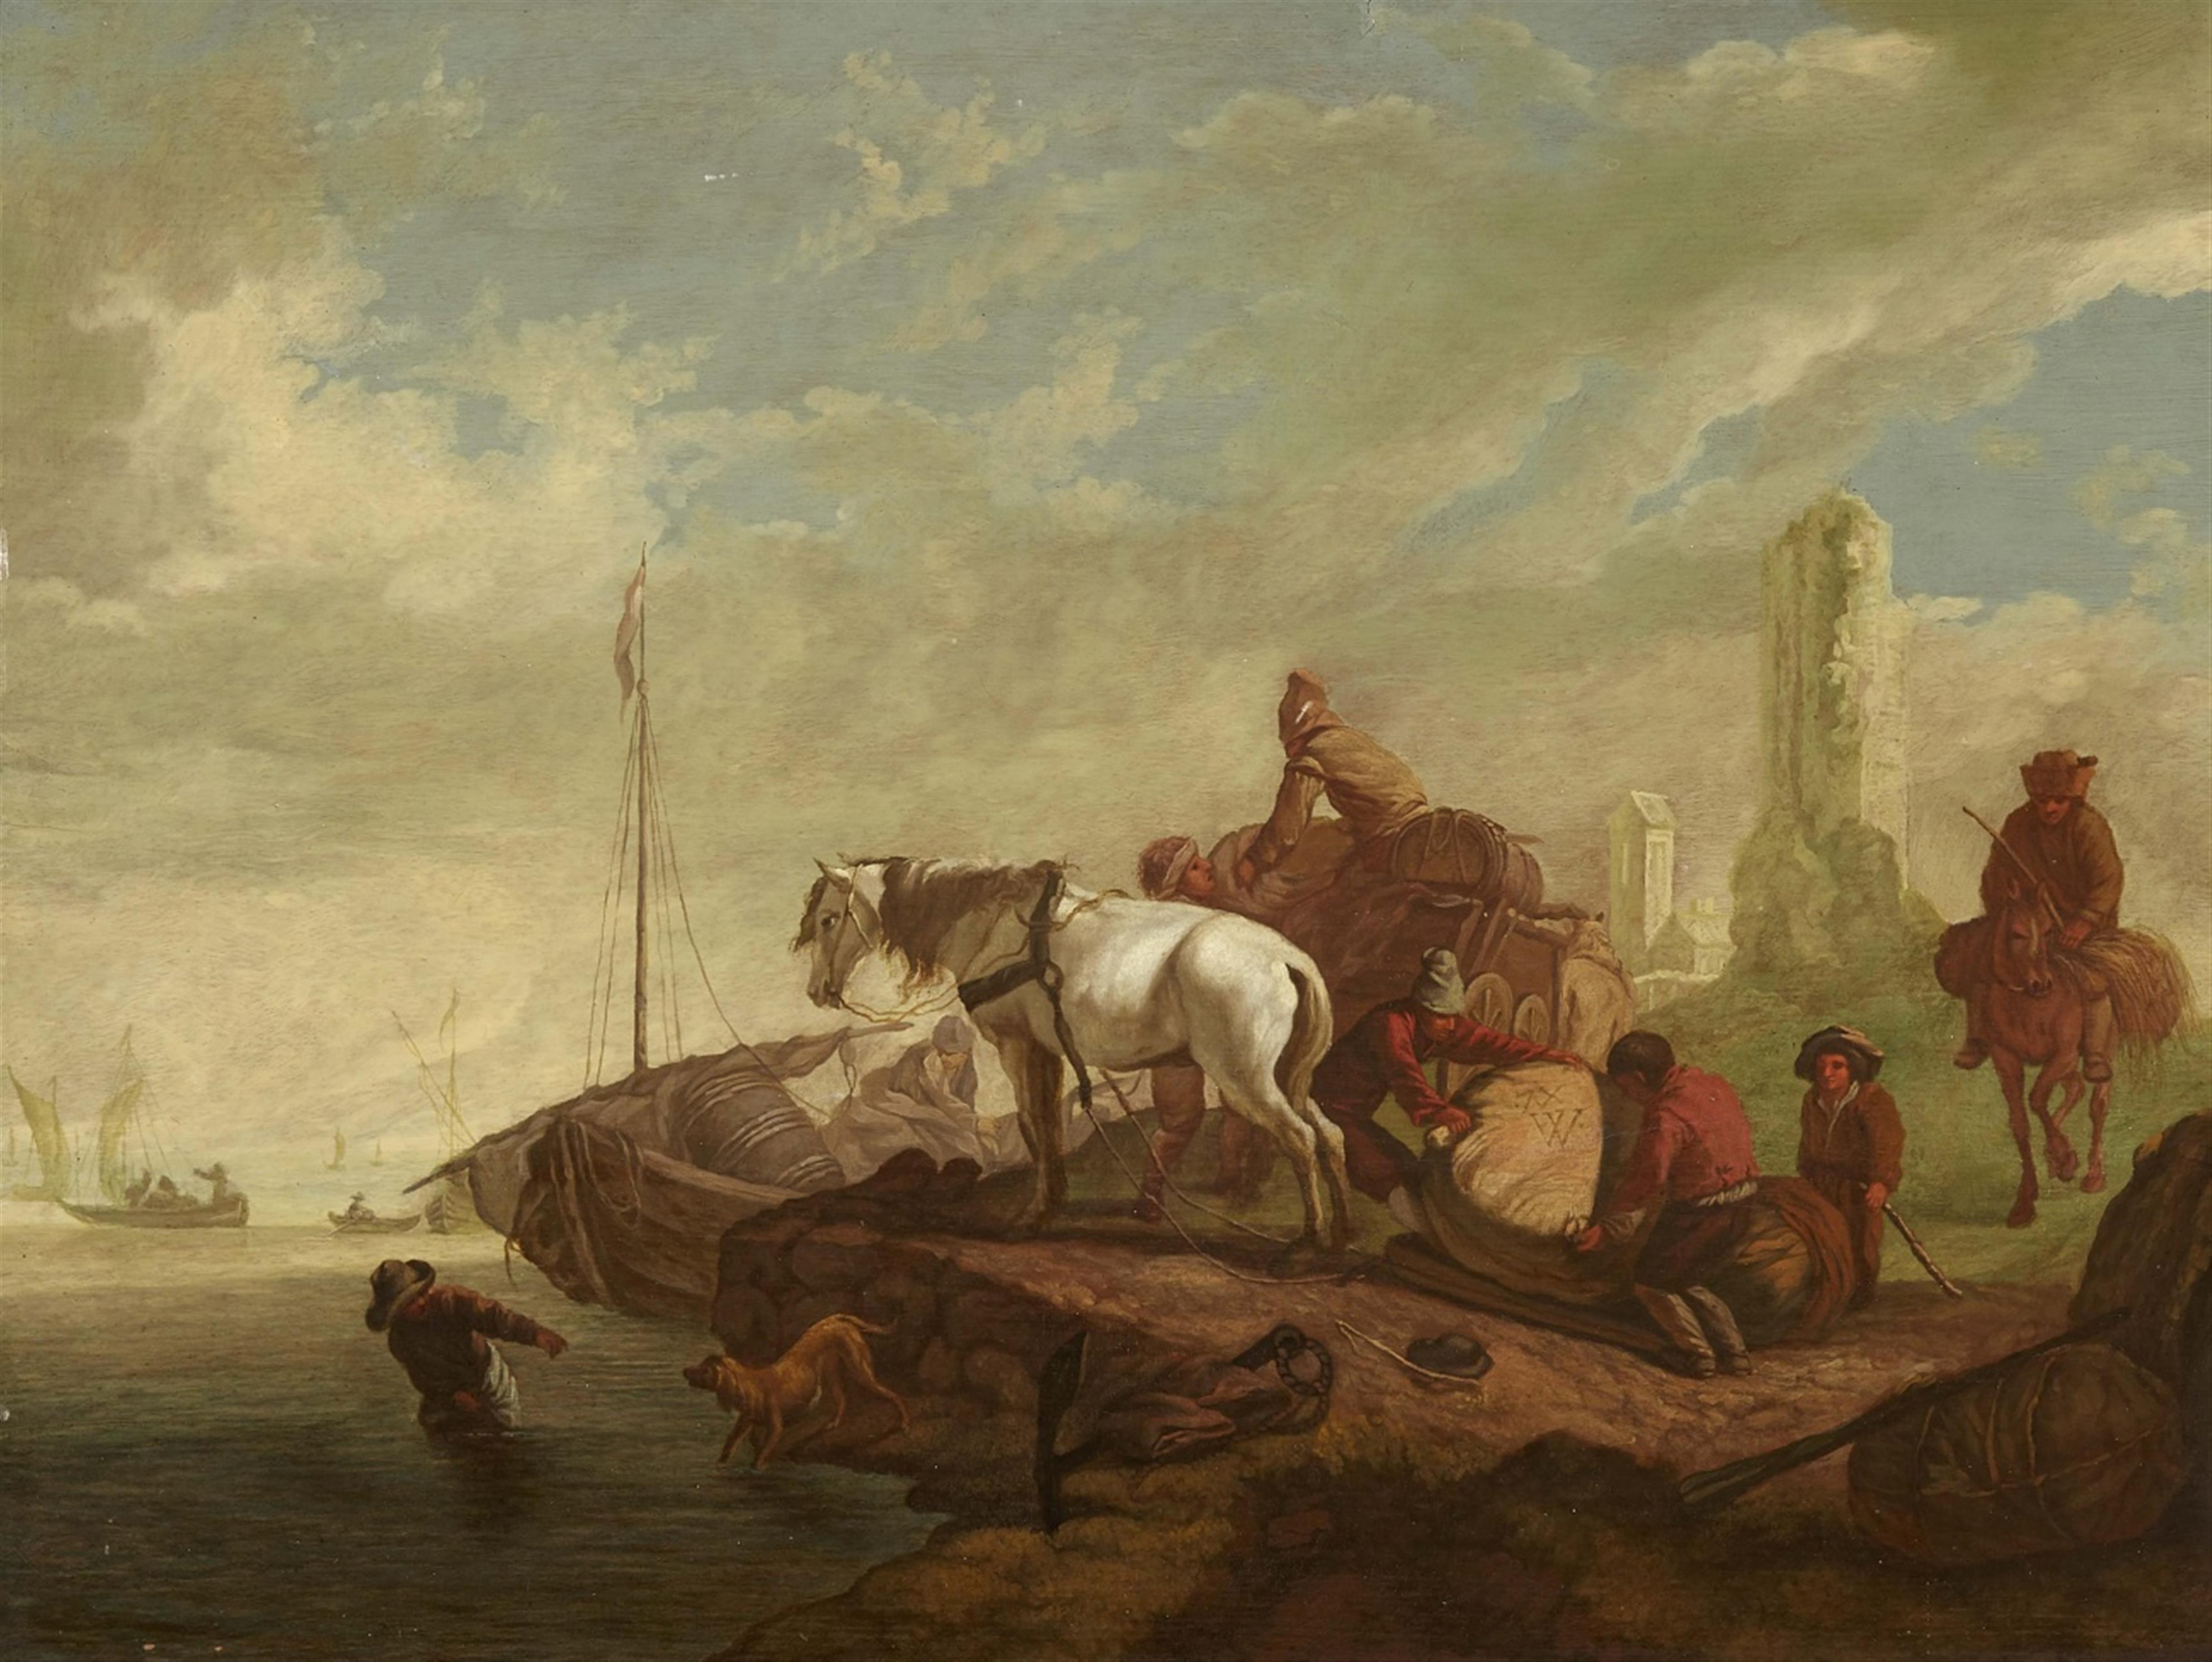 Philips Wouwerman, attributed to - River Landscape with Horsemen - image-1